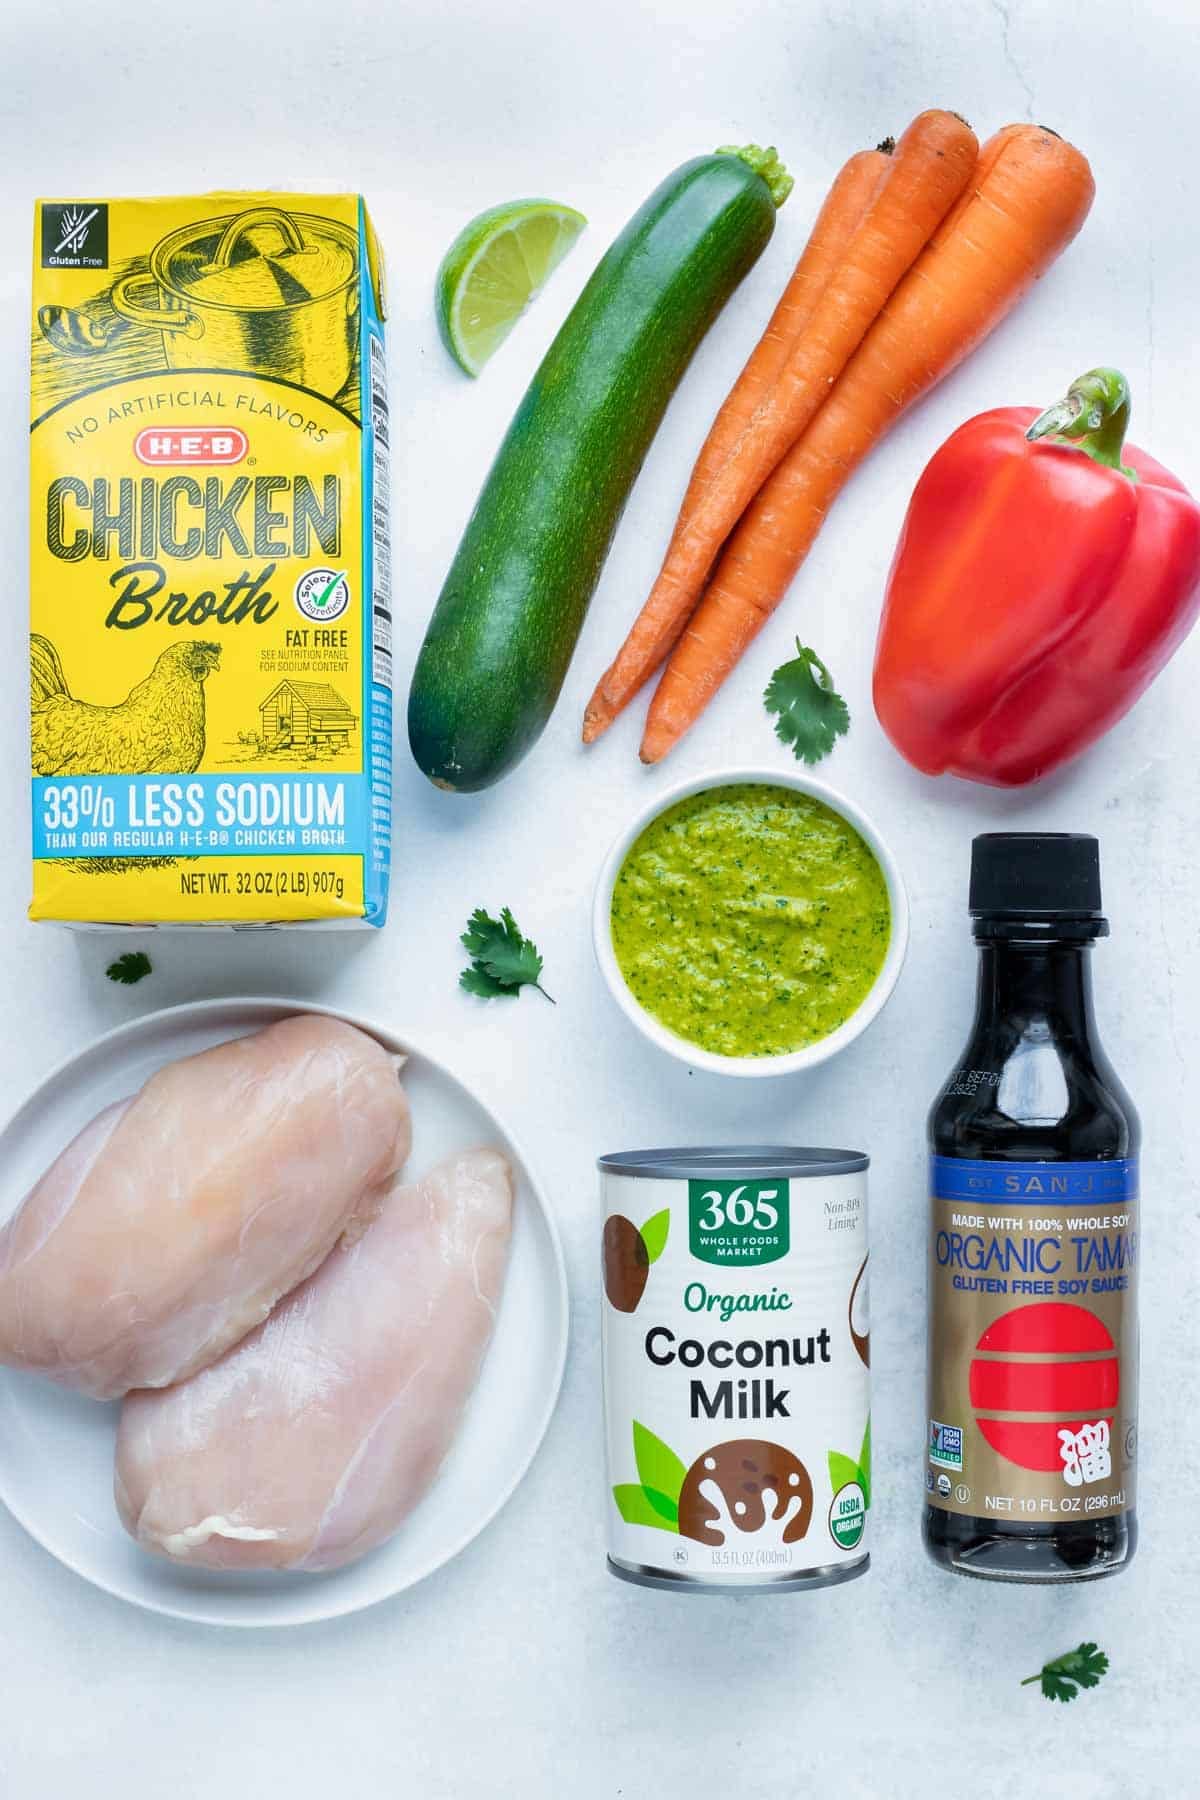 Chicken, carrots, bell peppers, soy sauce, green curry paste, coconut milk, and other ingredients are used to make Green chicken curry.